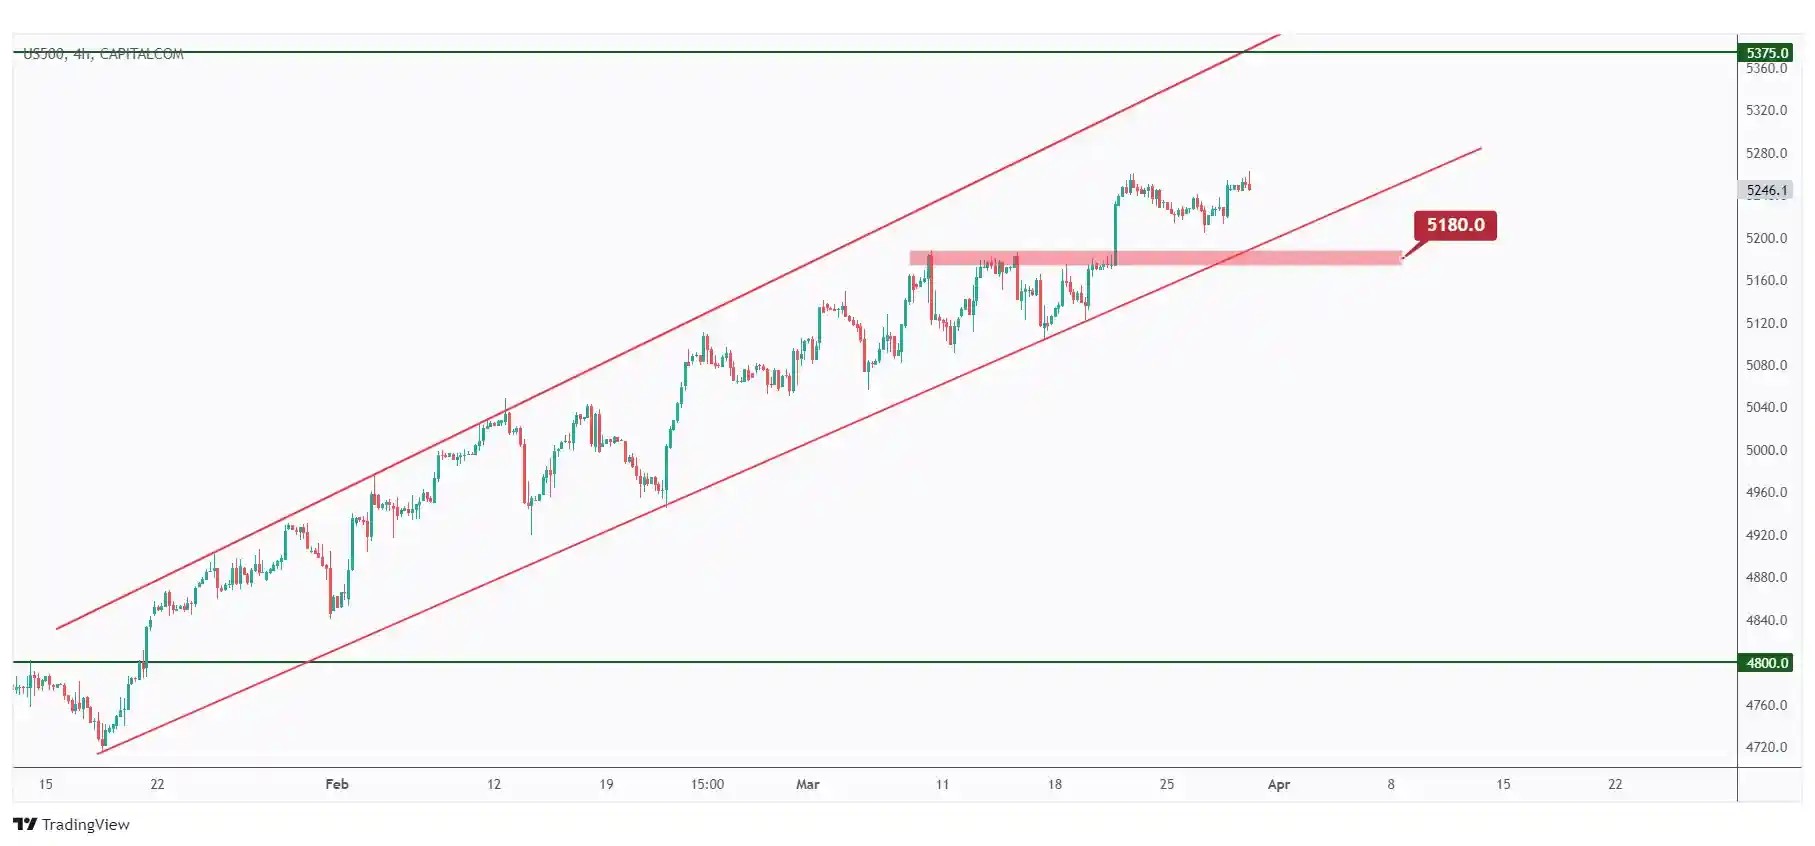 US500 4H chart overall bullish trading within the rising channel as long as the last major low at $5180 holds.